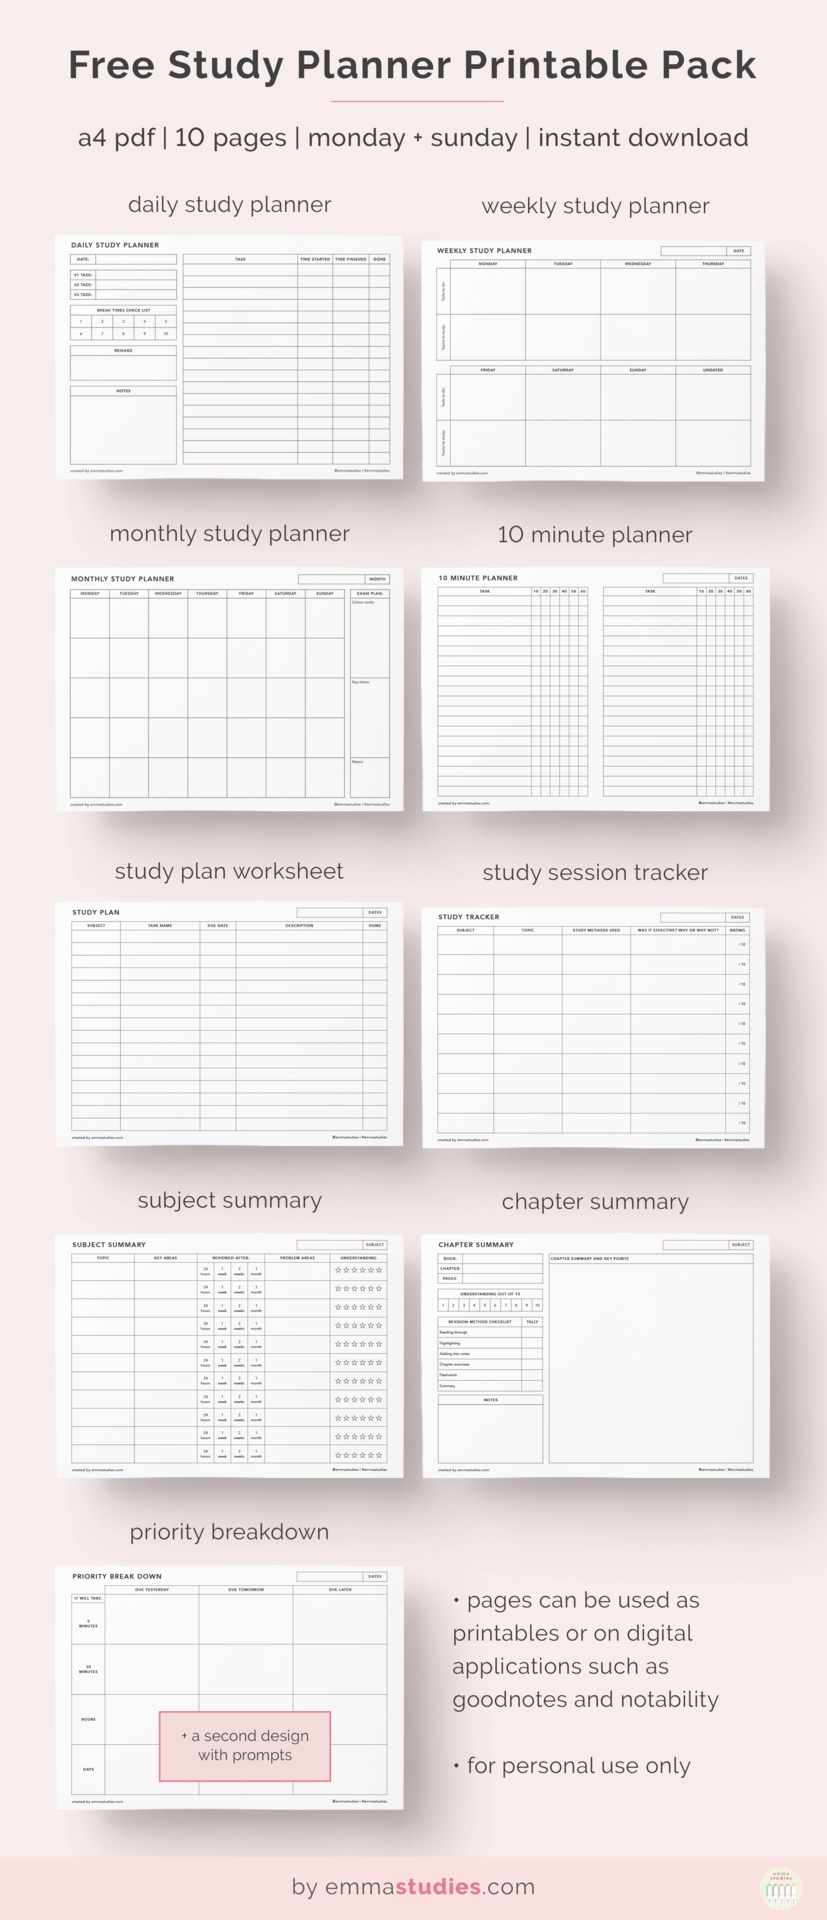 Emma&#039;s Studyblr — Free Study Planning Printable Pages! Here Are inside Printable Monthly Organiser Pages Monday To Sunday